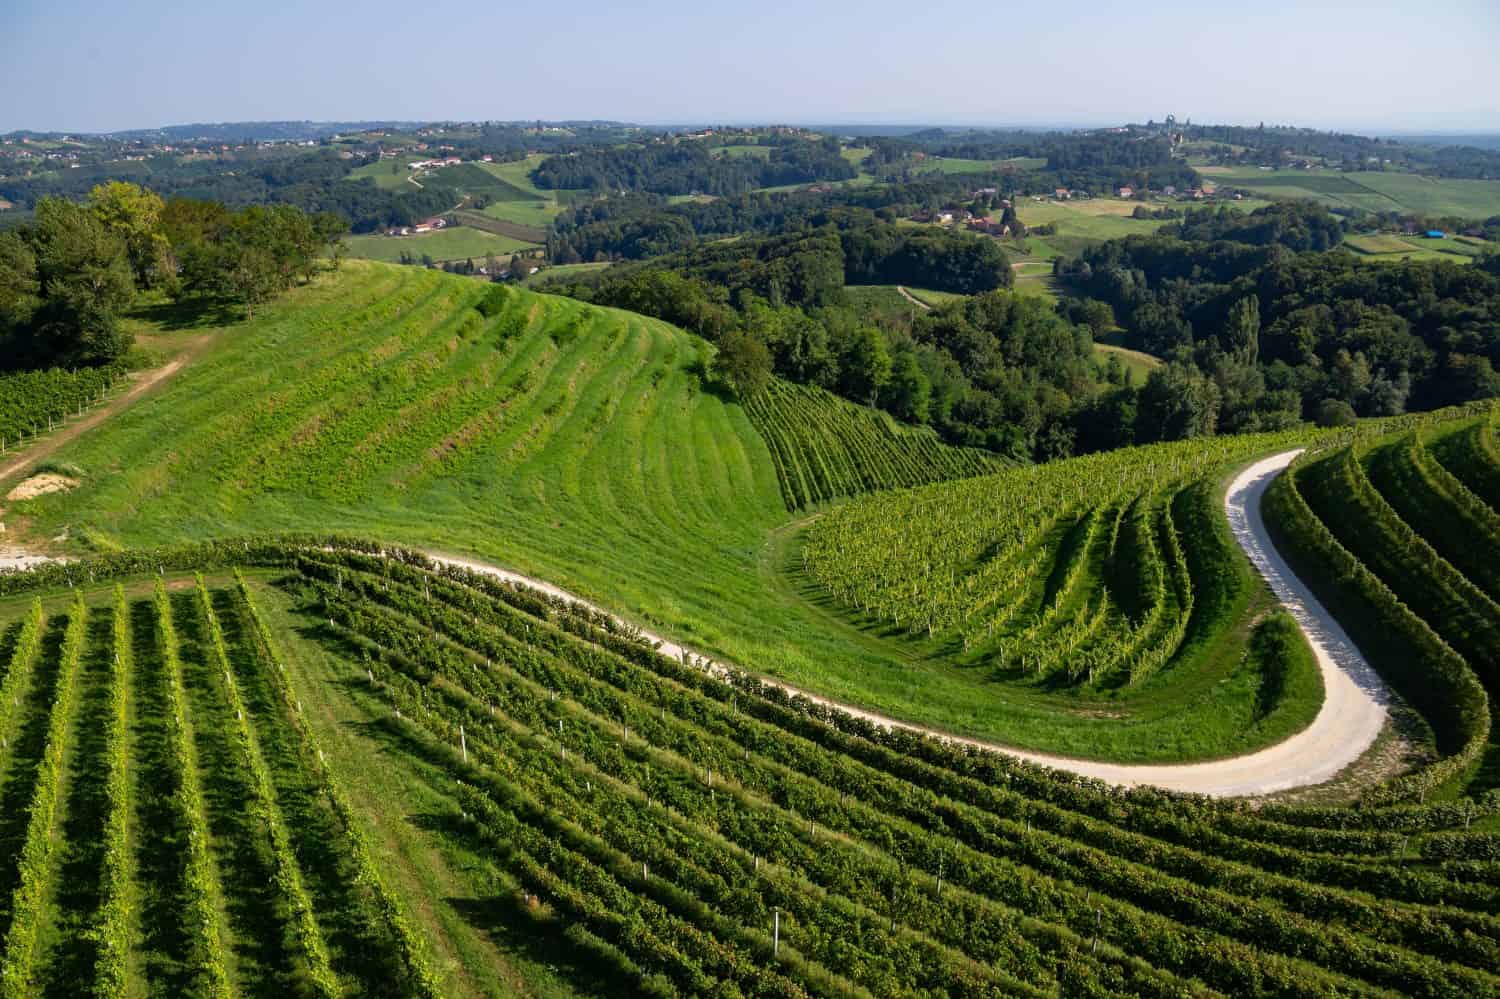 Beautiful green rows of vine in vineyards of Štrigova, situated on Mađerka hill near the border with Slovenia, in northern Croatian region of Međimurje on a sunny summer day